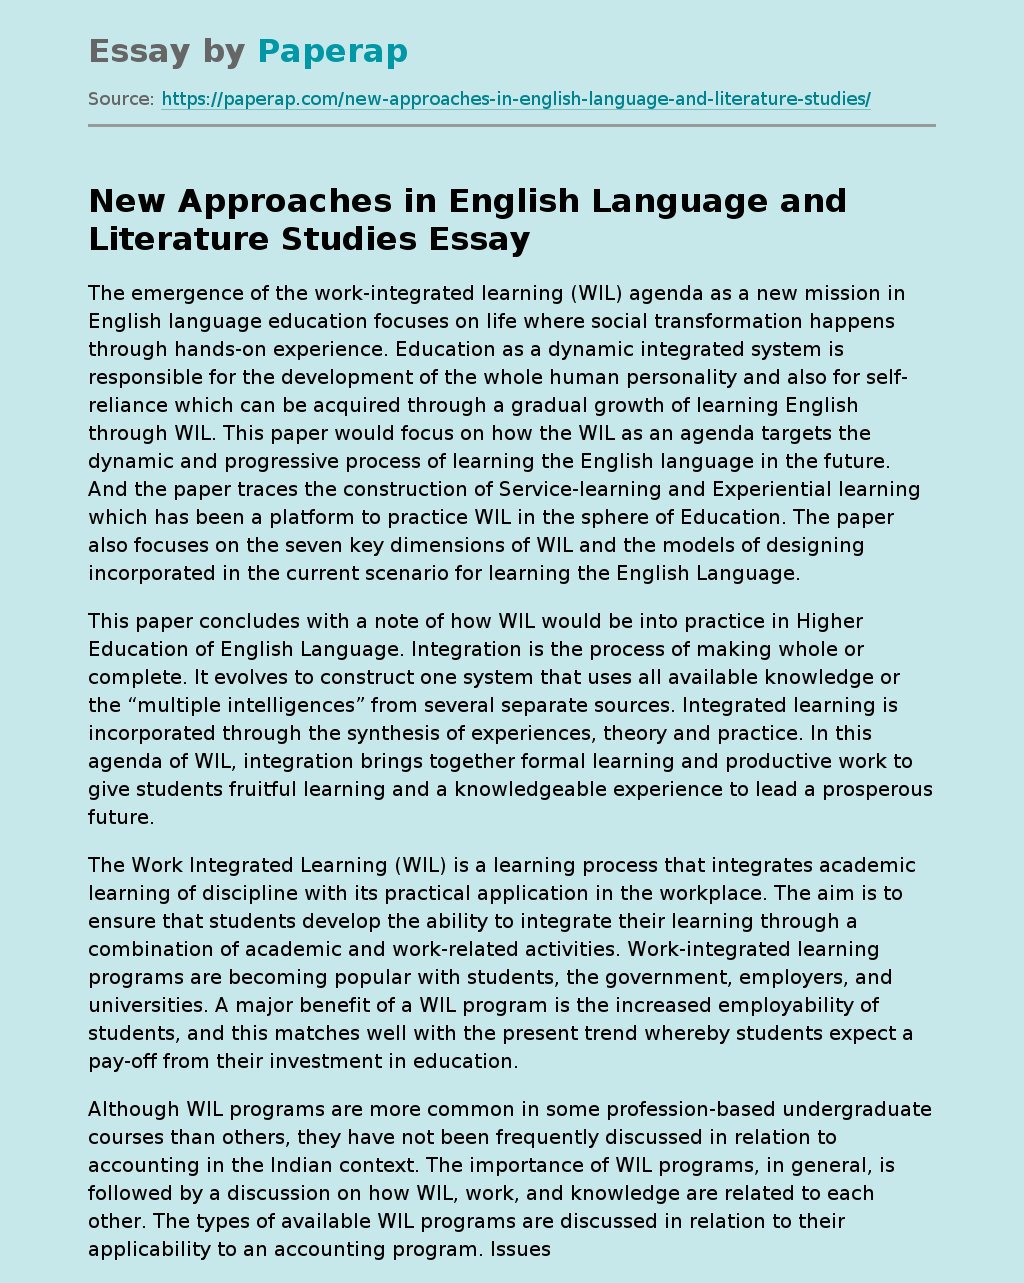 New Approaches in English Language and Literature Studies